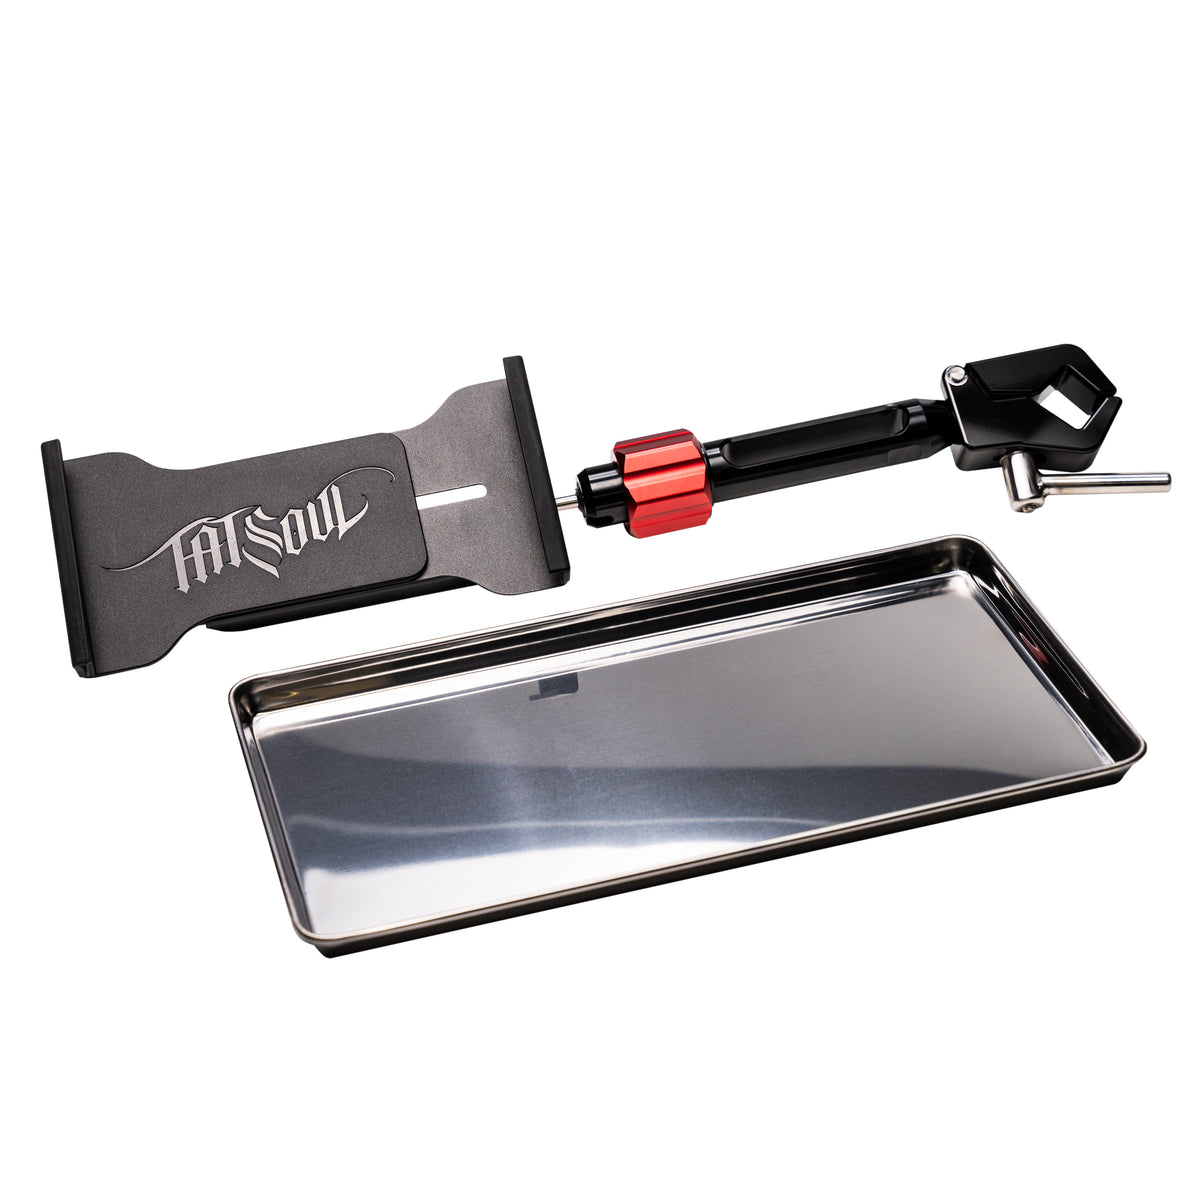 TATSoul Extension Arm + Stainless Steel Tray